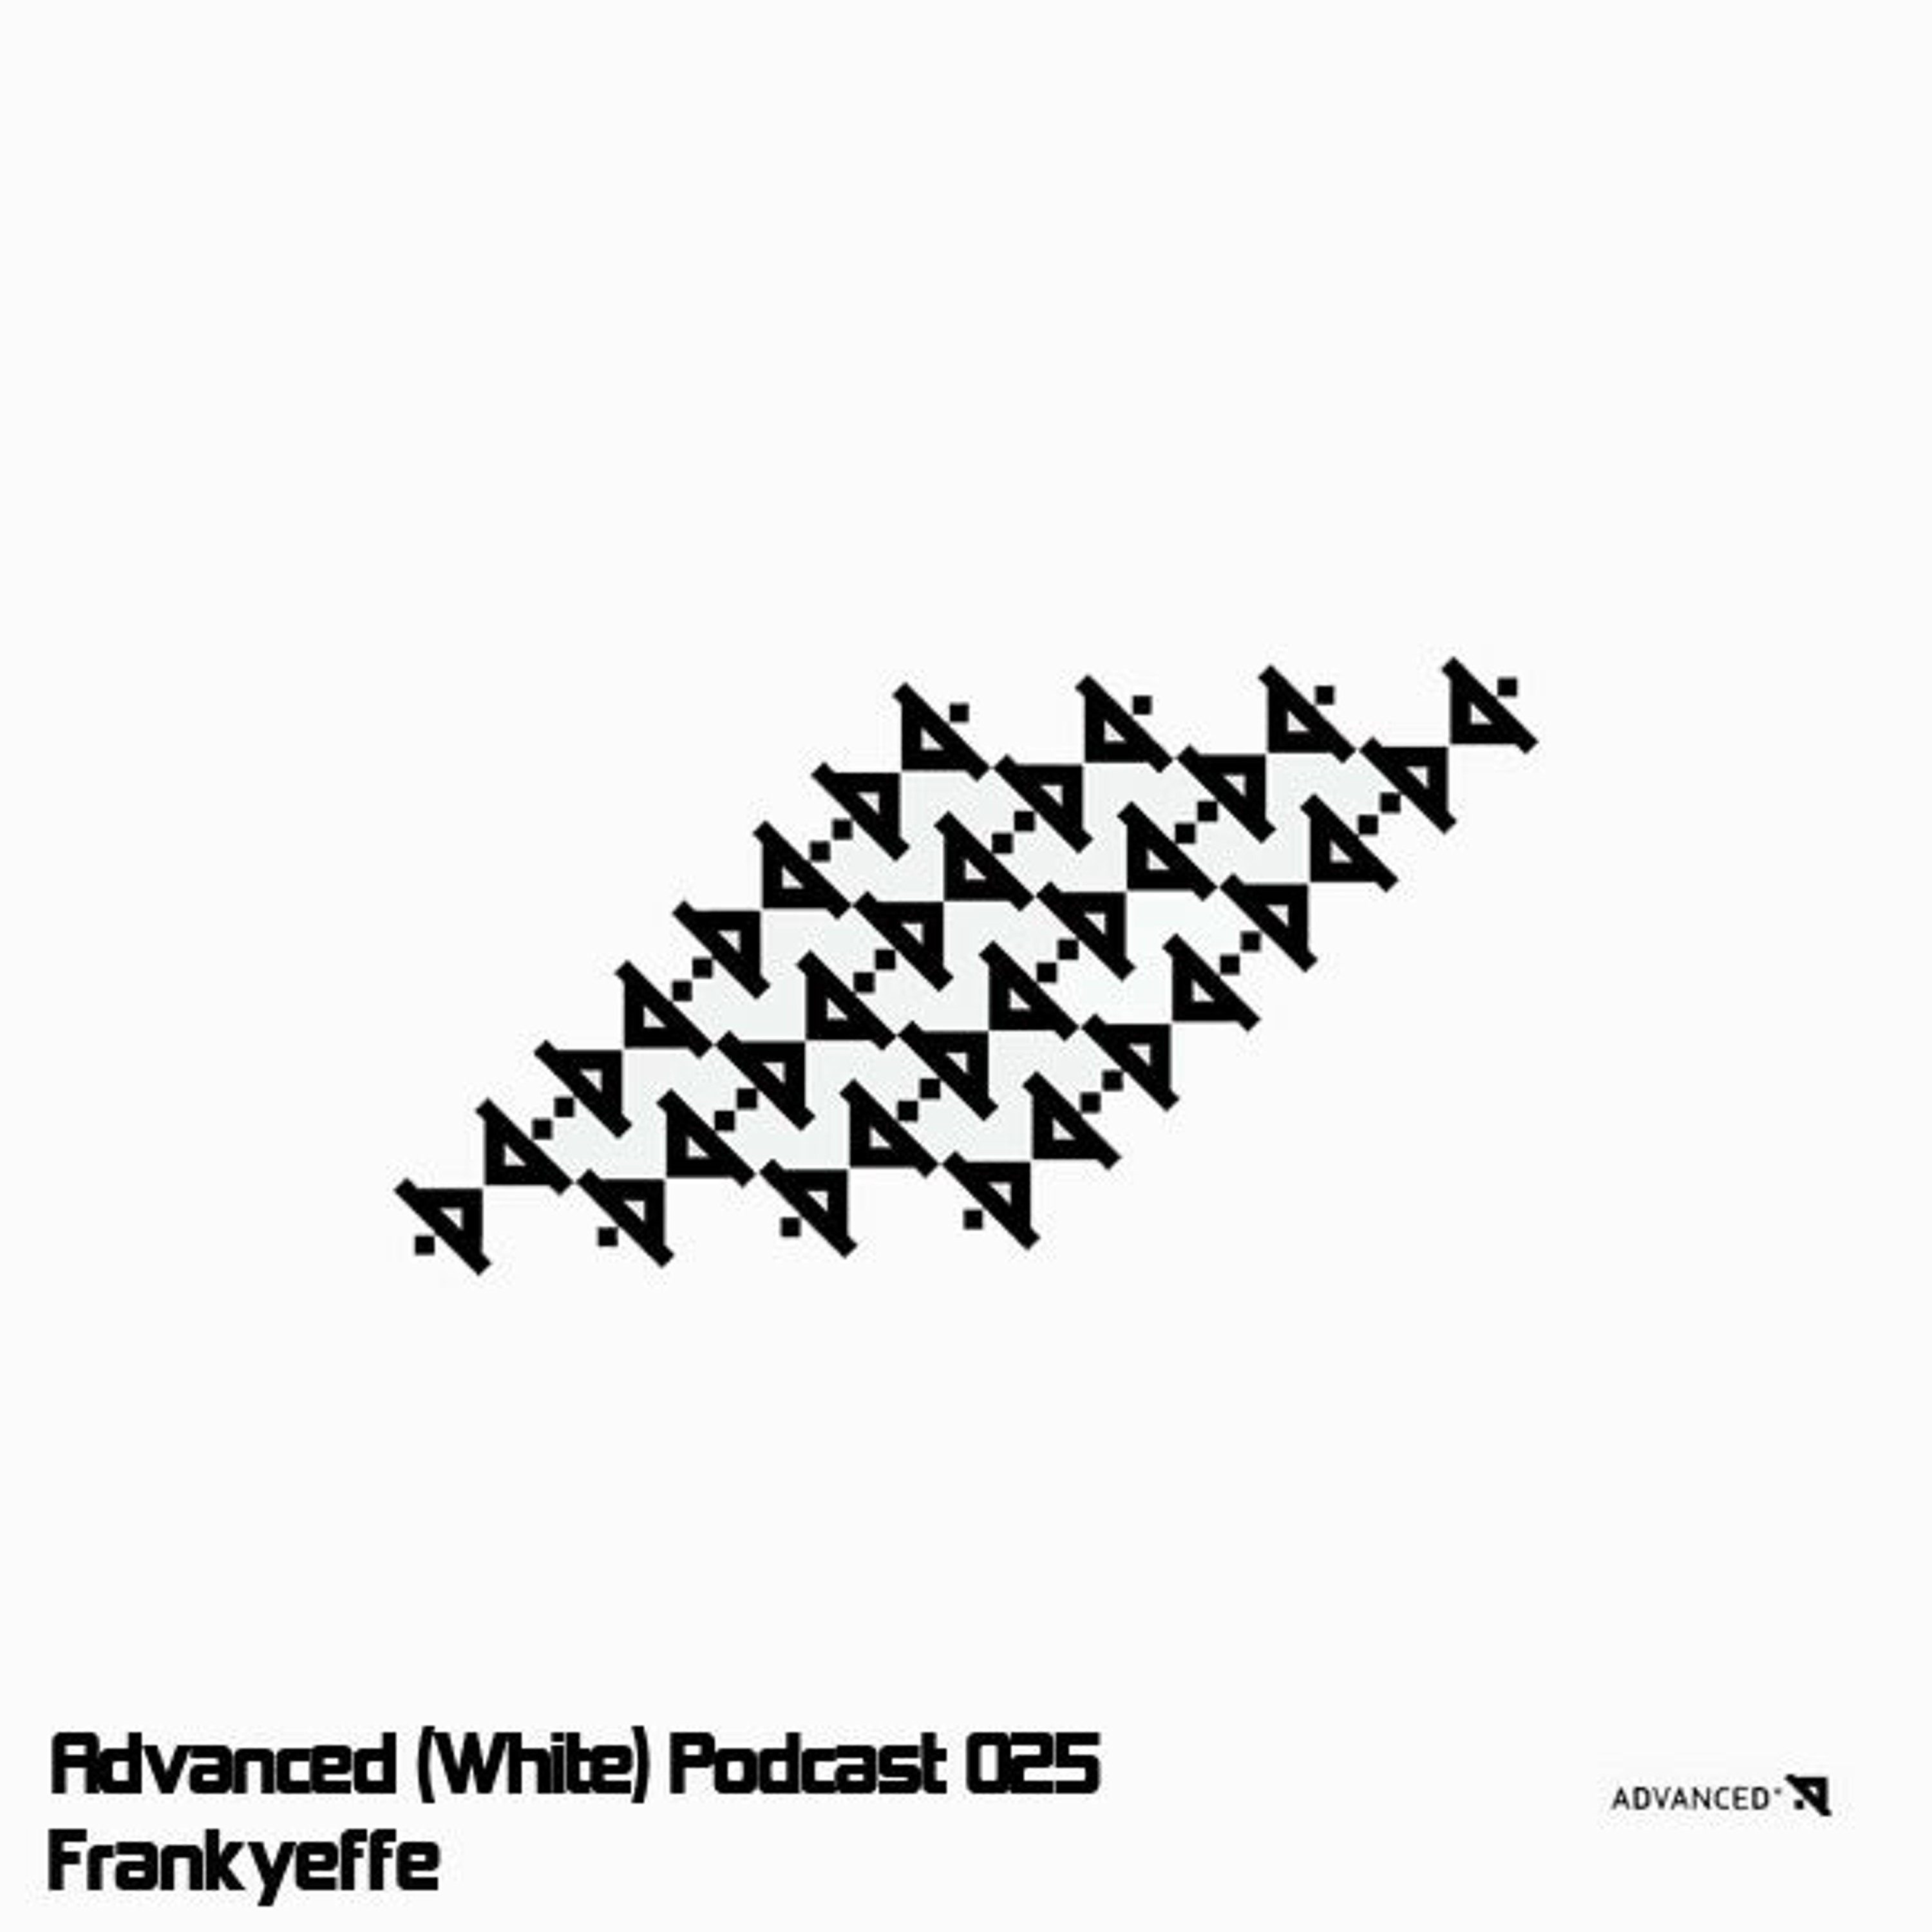 Advanced (White) Podcast 025 with Frankyeffe